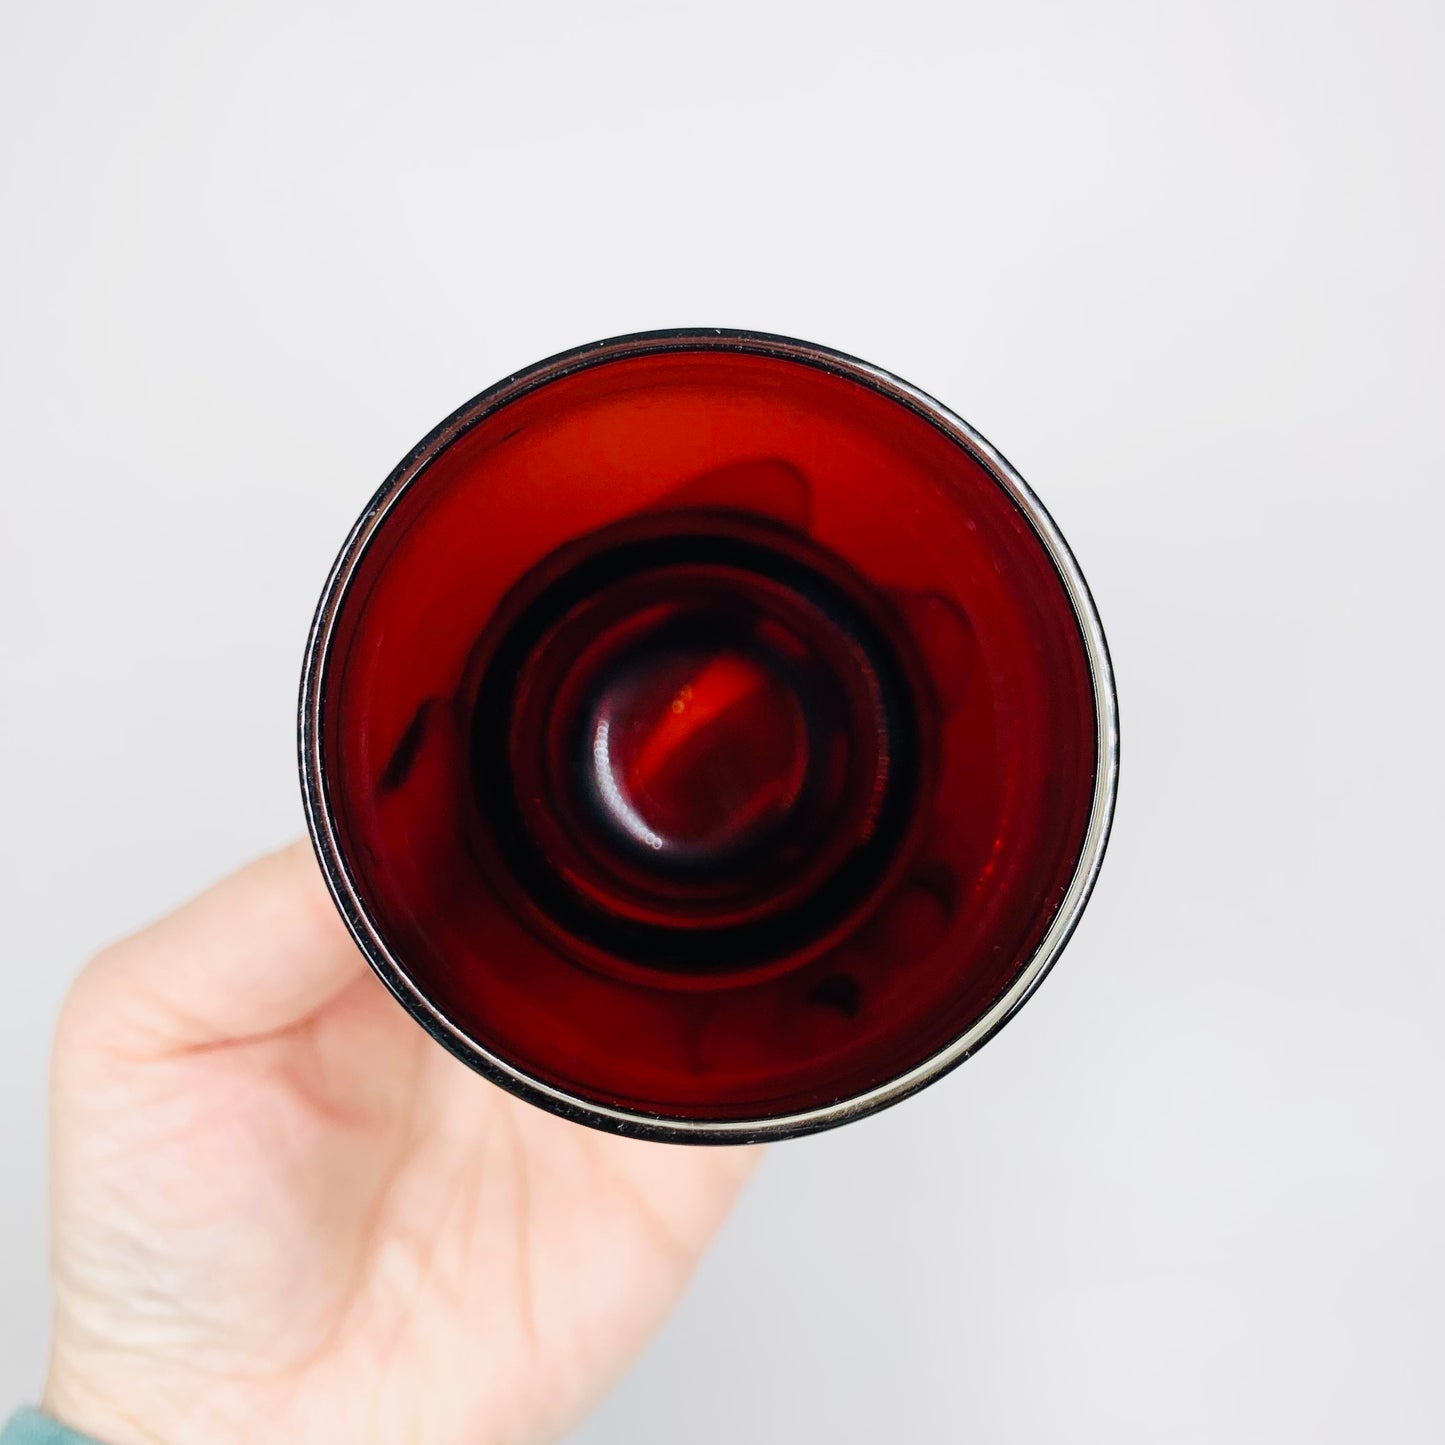 MCM Scandinavian cased red glass tumblers